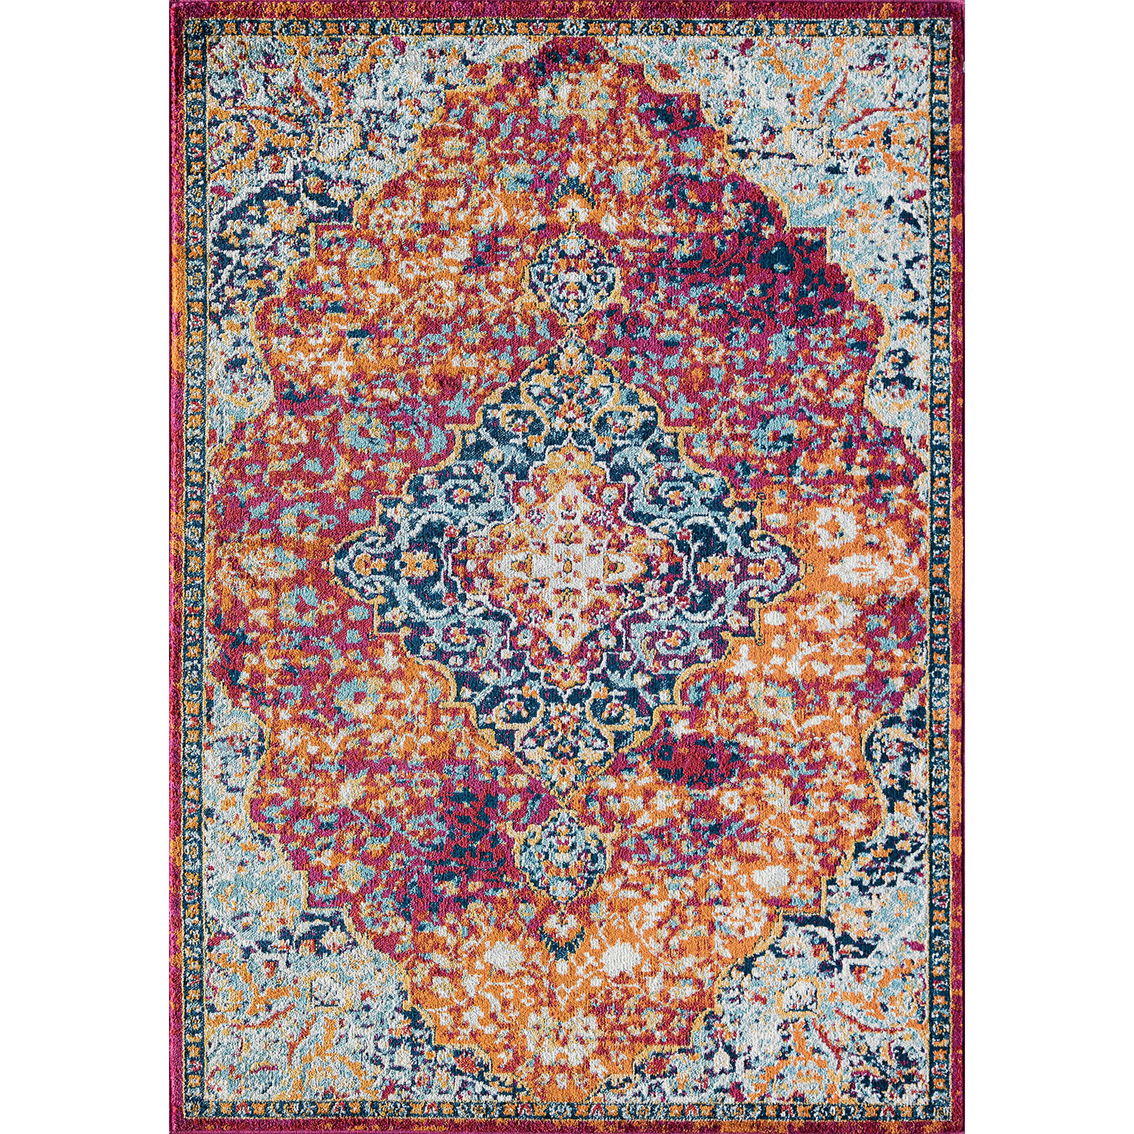 Rugs America Harper Rosy Peach Abstract Vintage Area Rug - Image 1 of 8